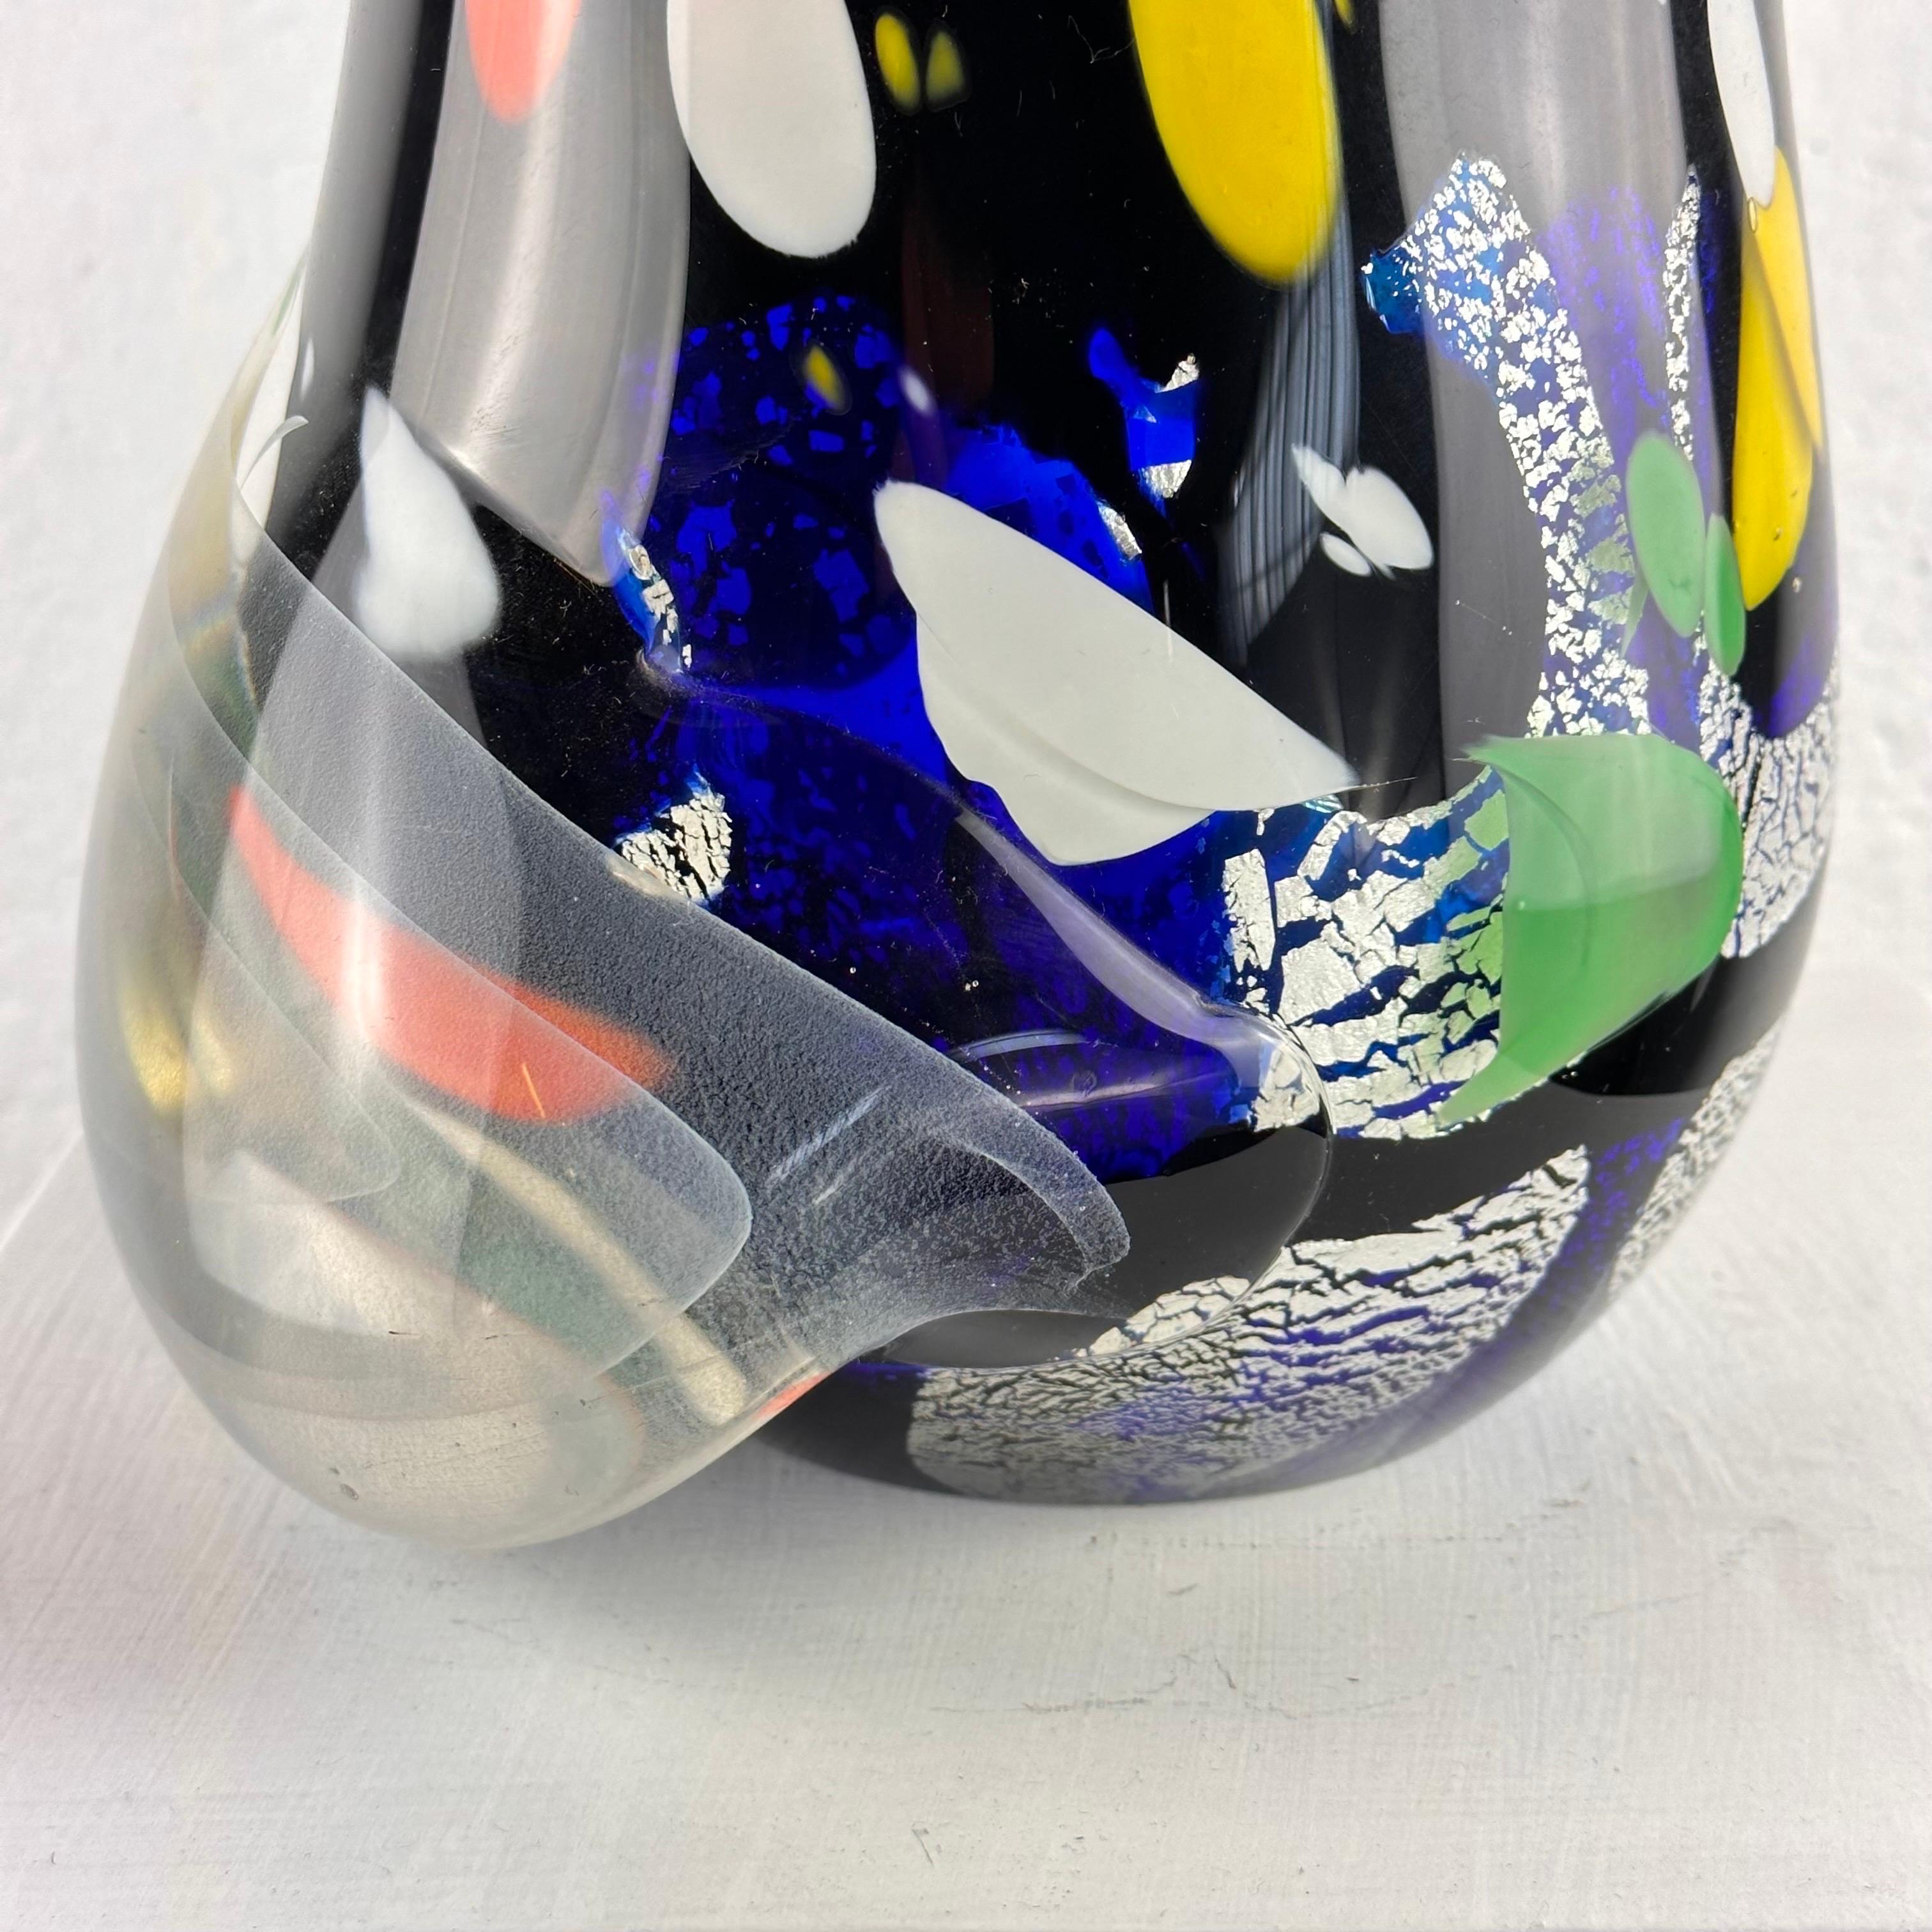 Exquisite Abstract Murano Glass Vase by S. Toso, Signed 1970s Masterpiece For Sale 7